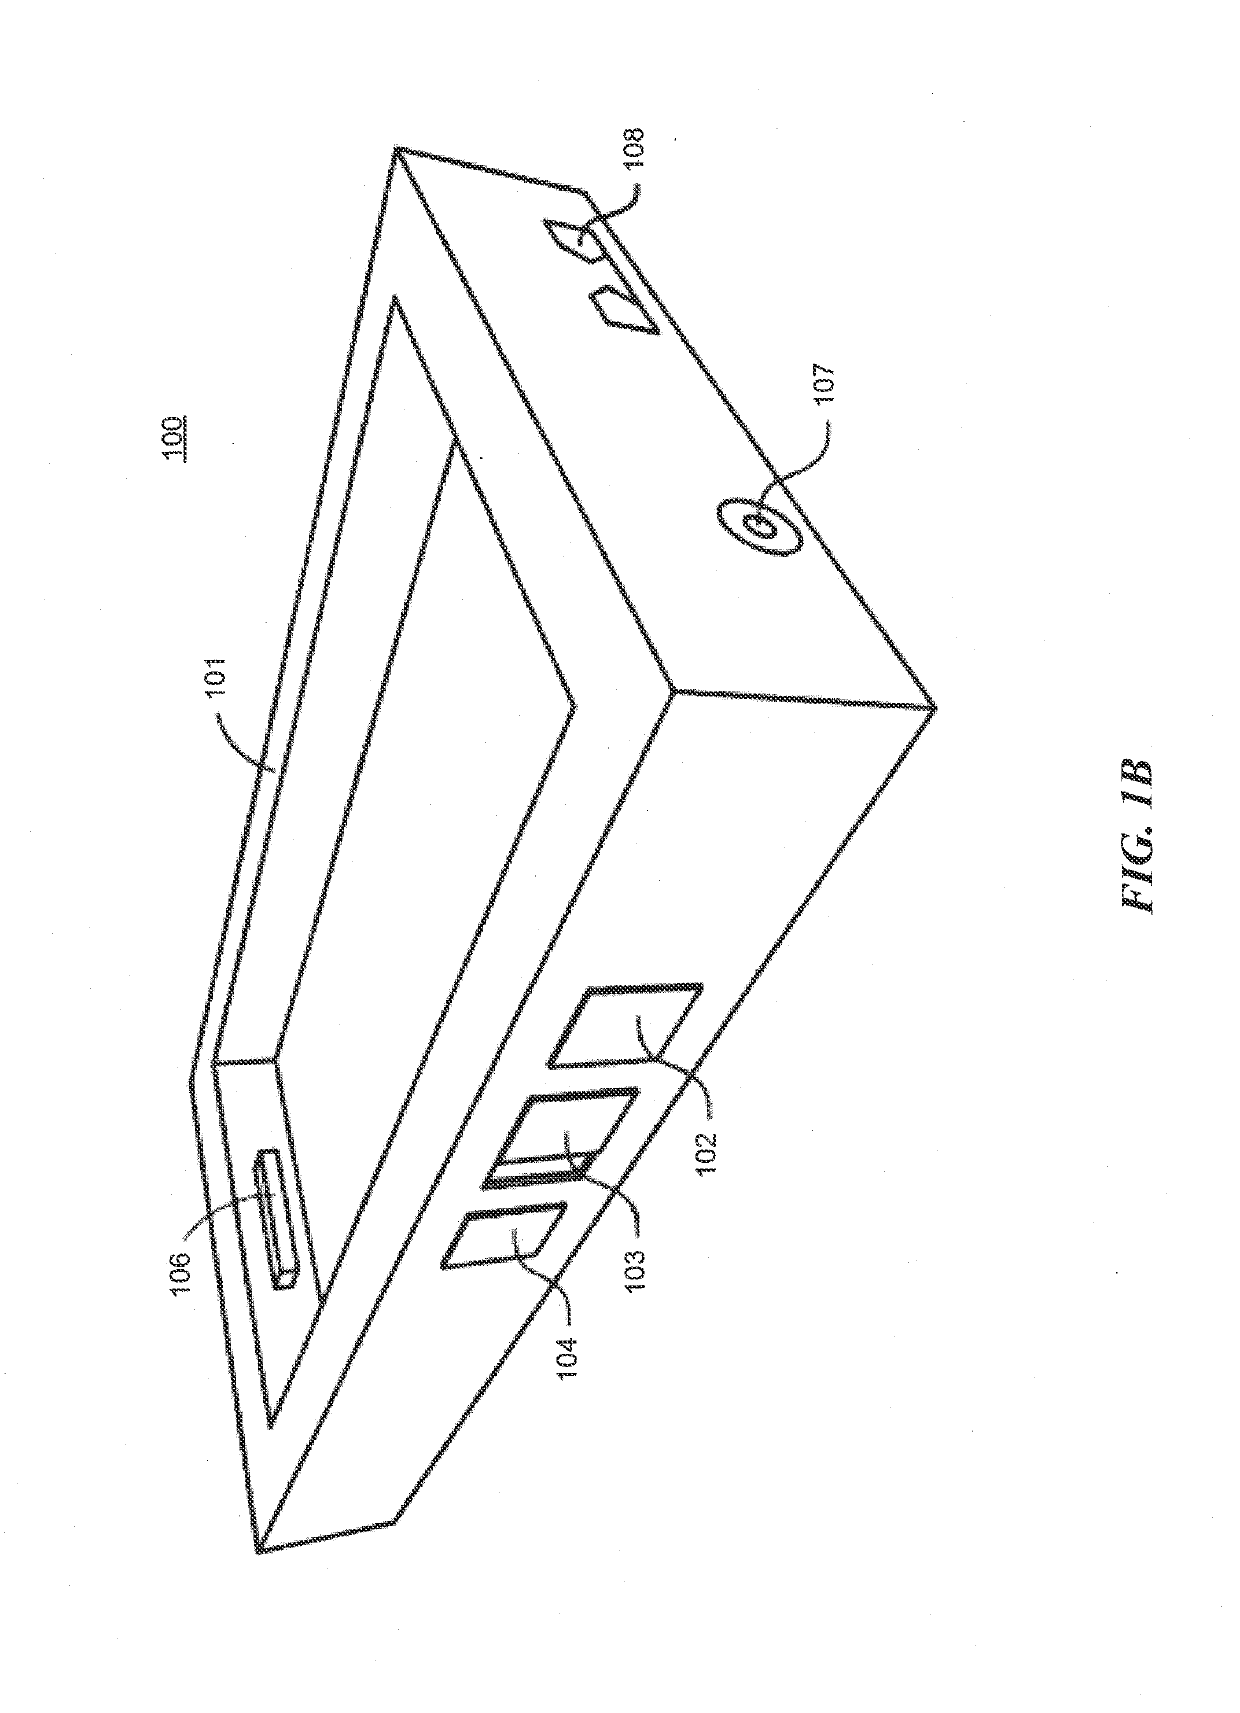 Self-defense device for handheld electronic devices